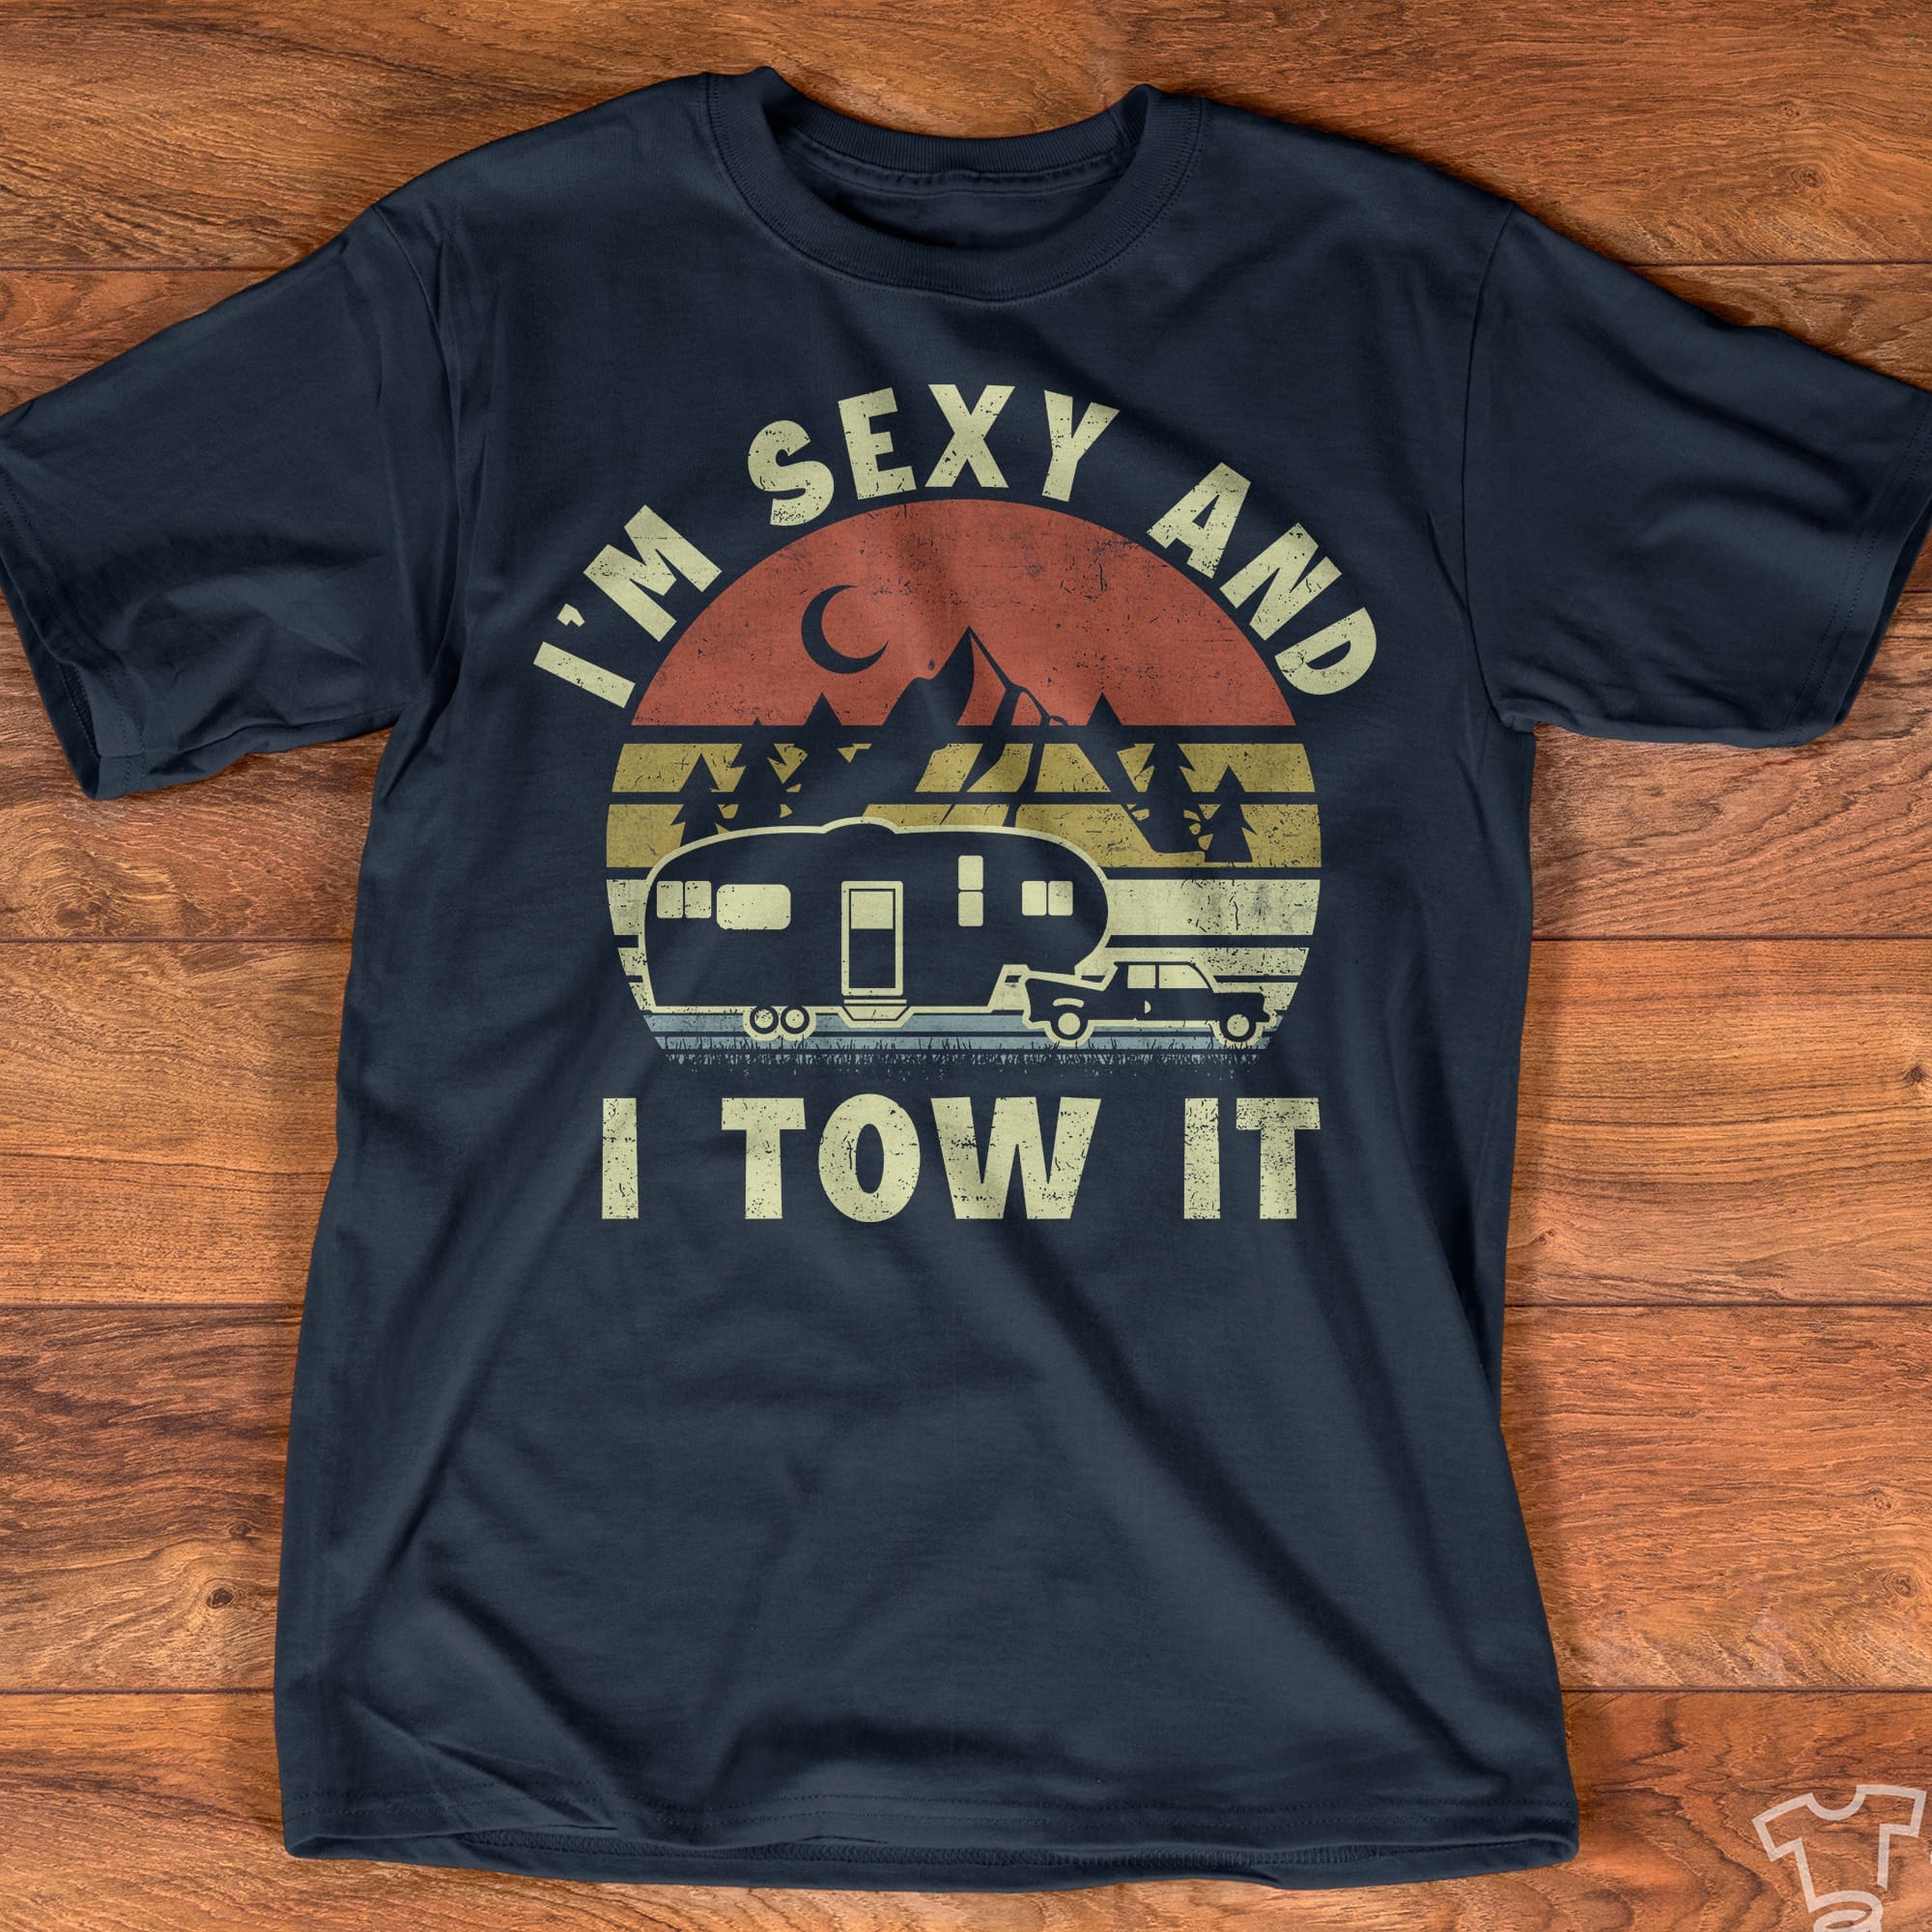 I'm sexy and and I tow it - Recreational vehicle, gift for camping person